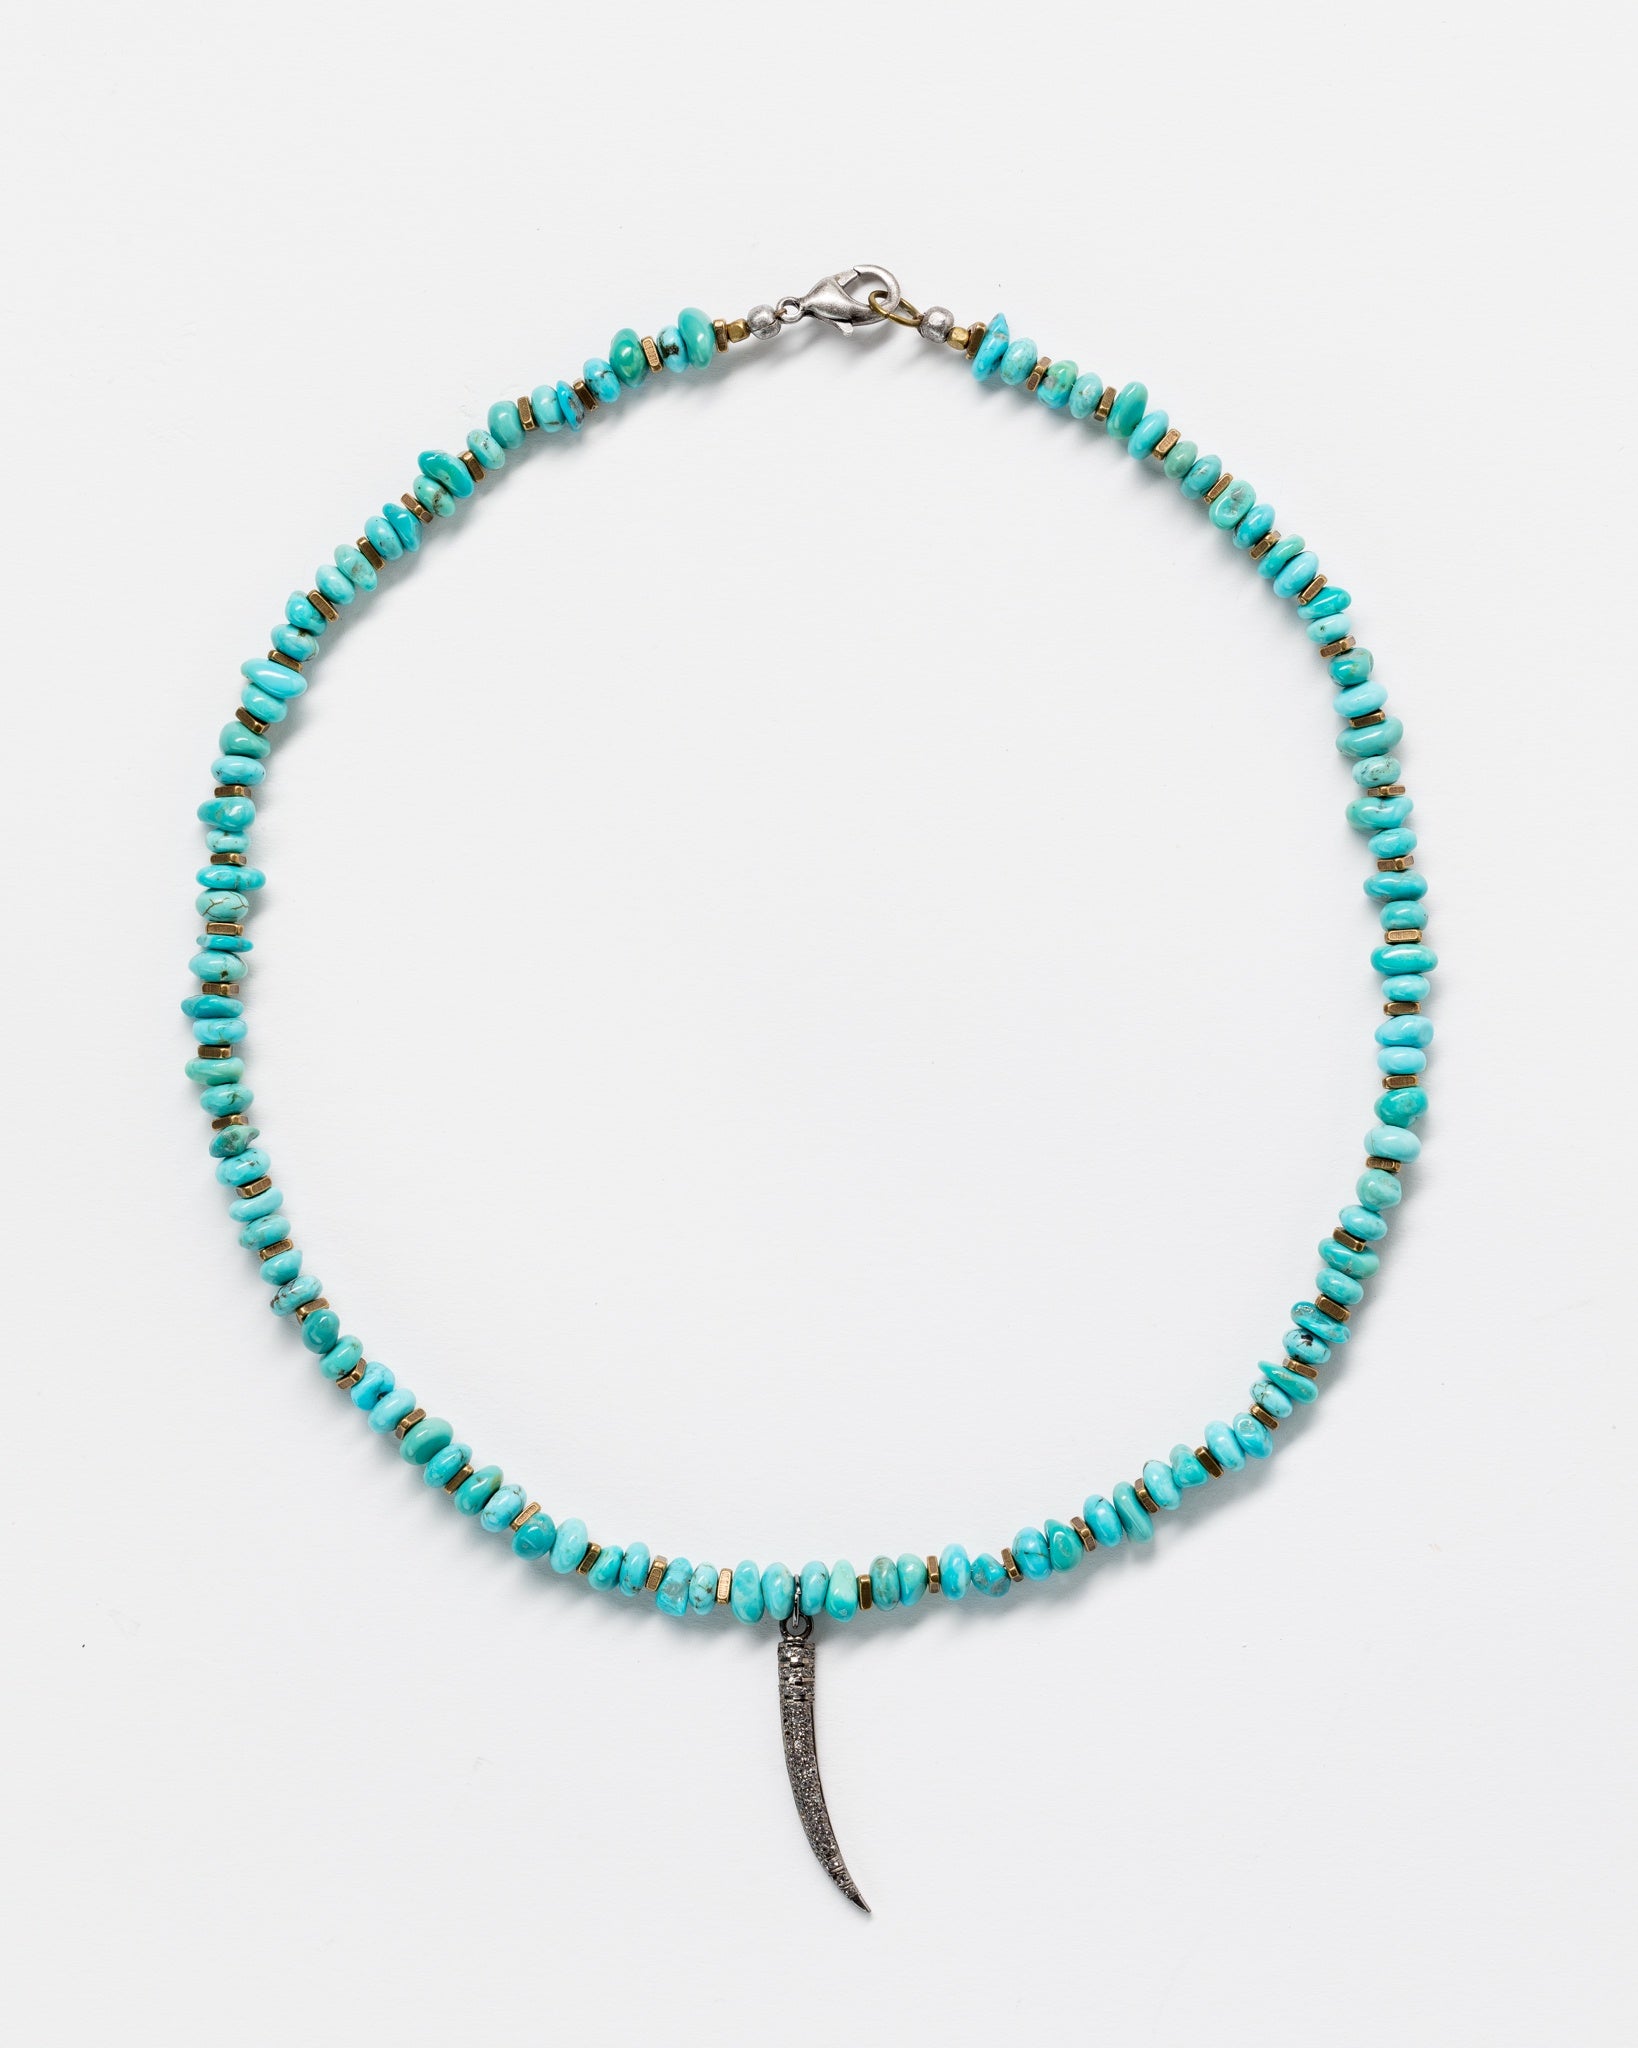 A Designs By Raya necklace featuring a string of turquoise beads, styled in the Arizona fashion, with a central, silver-colored, curved horn pendant against a white background.